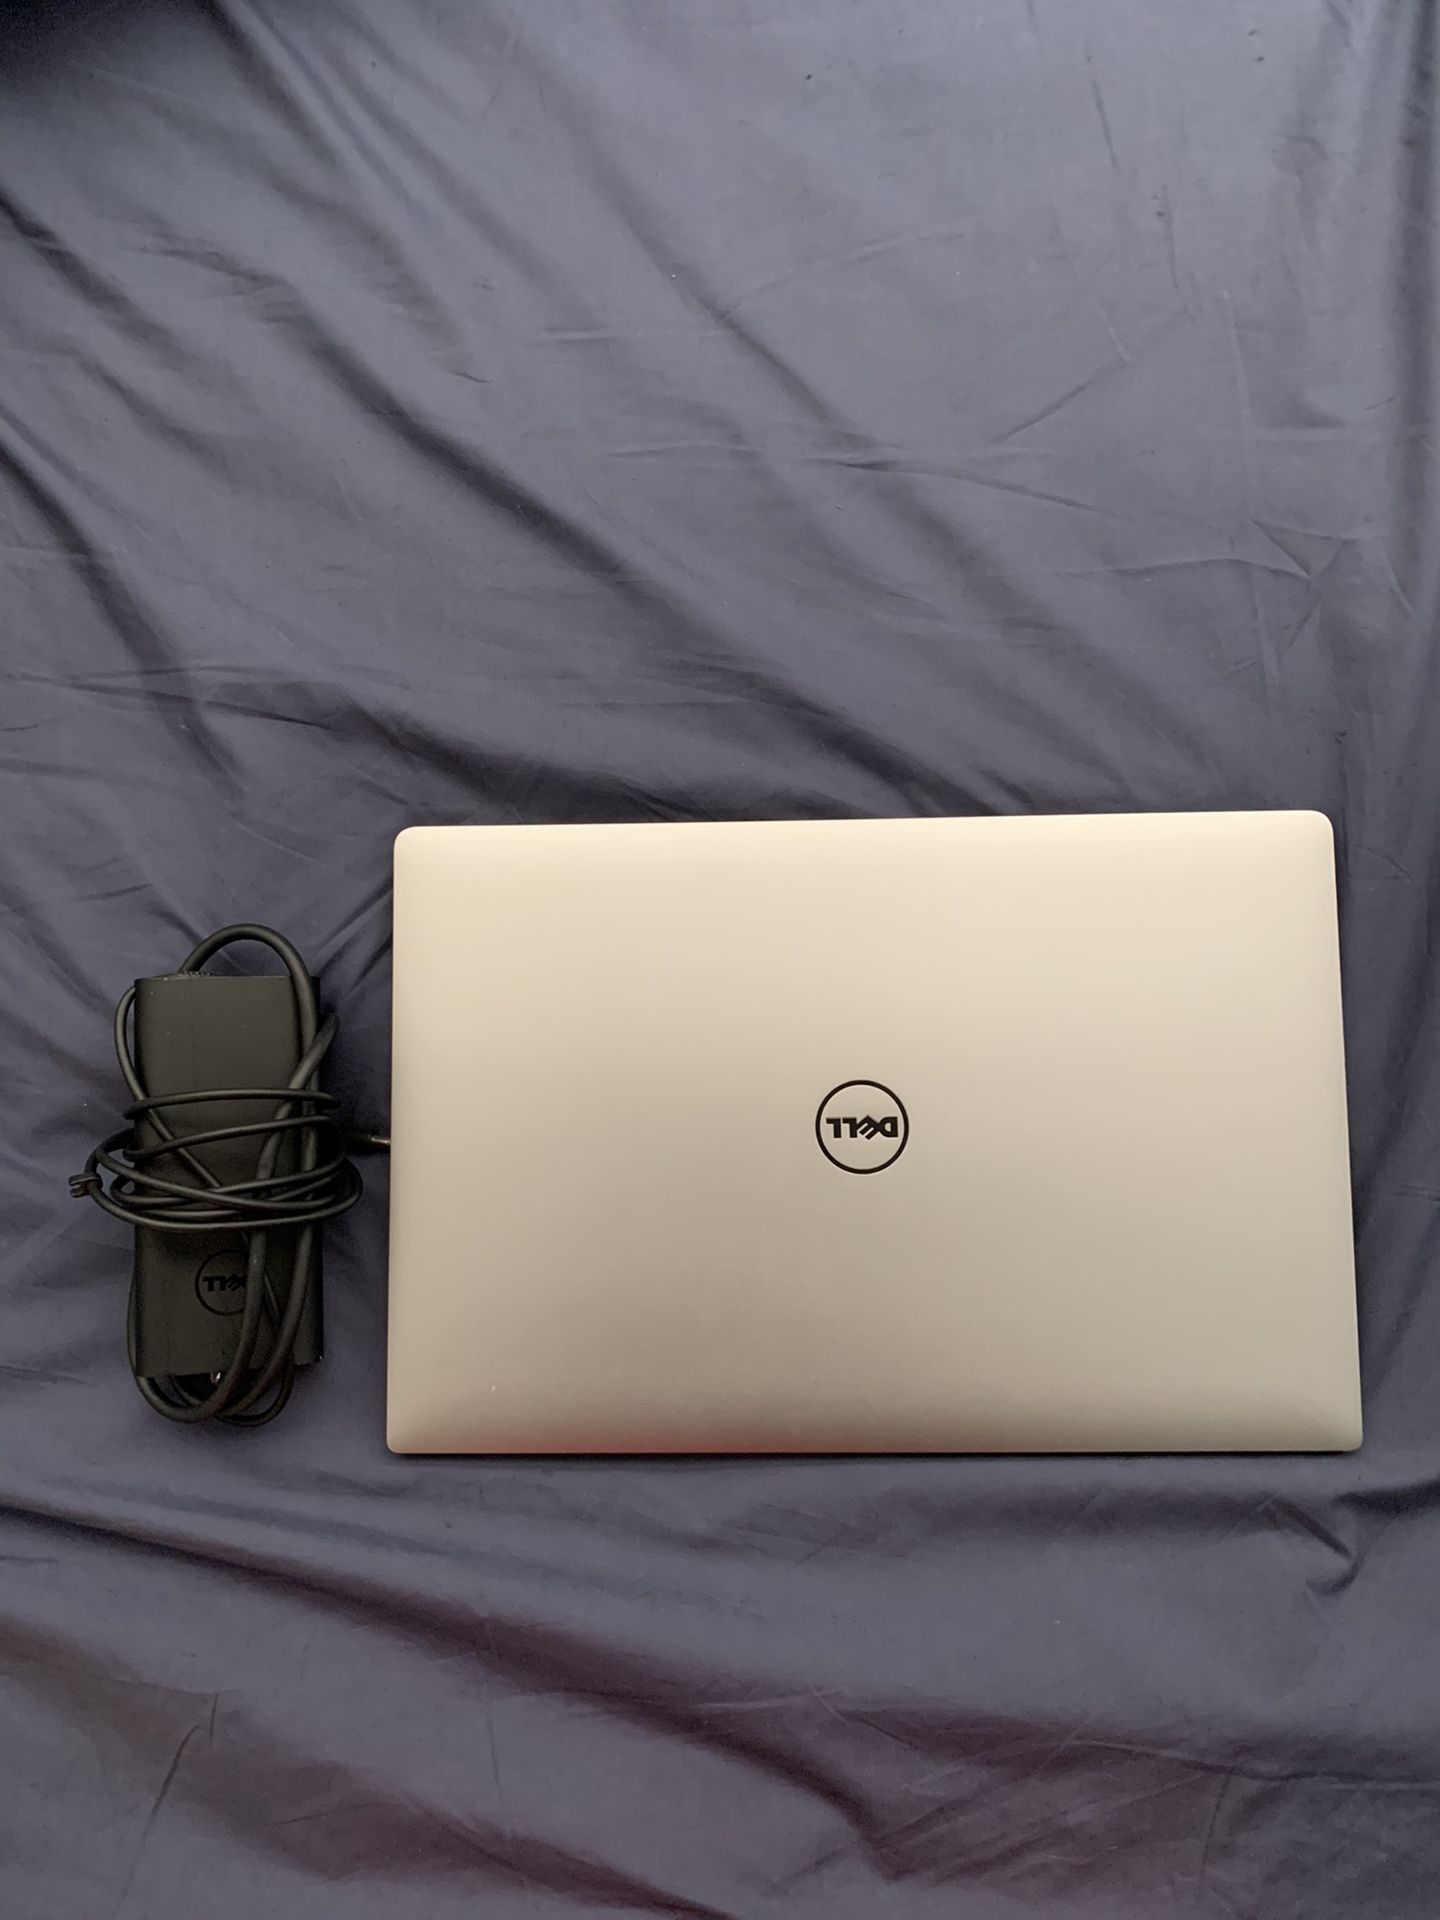 Dell XPS 15 9560 Laptop (Great Condition)